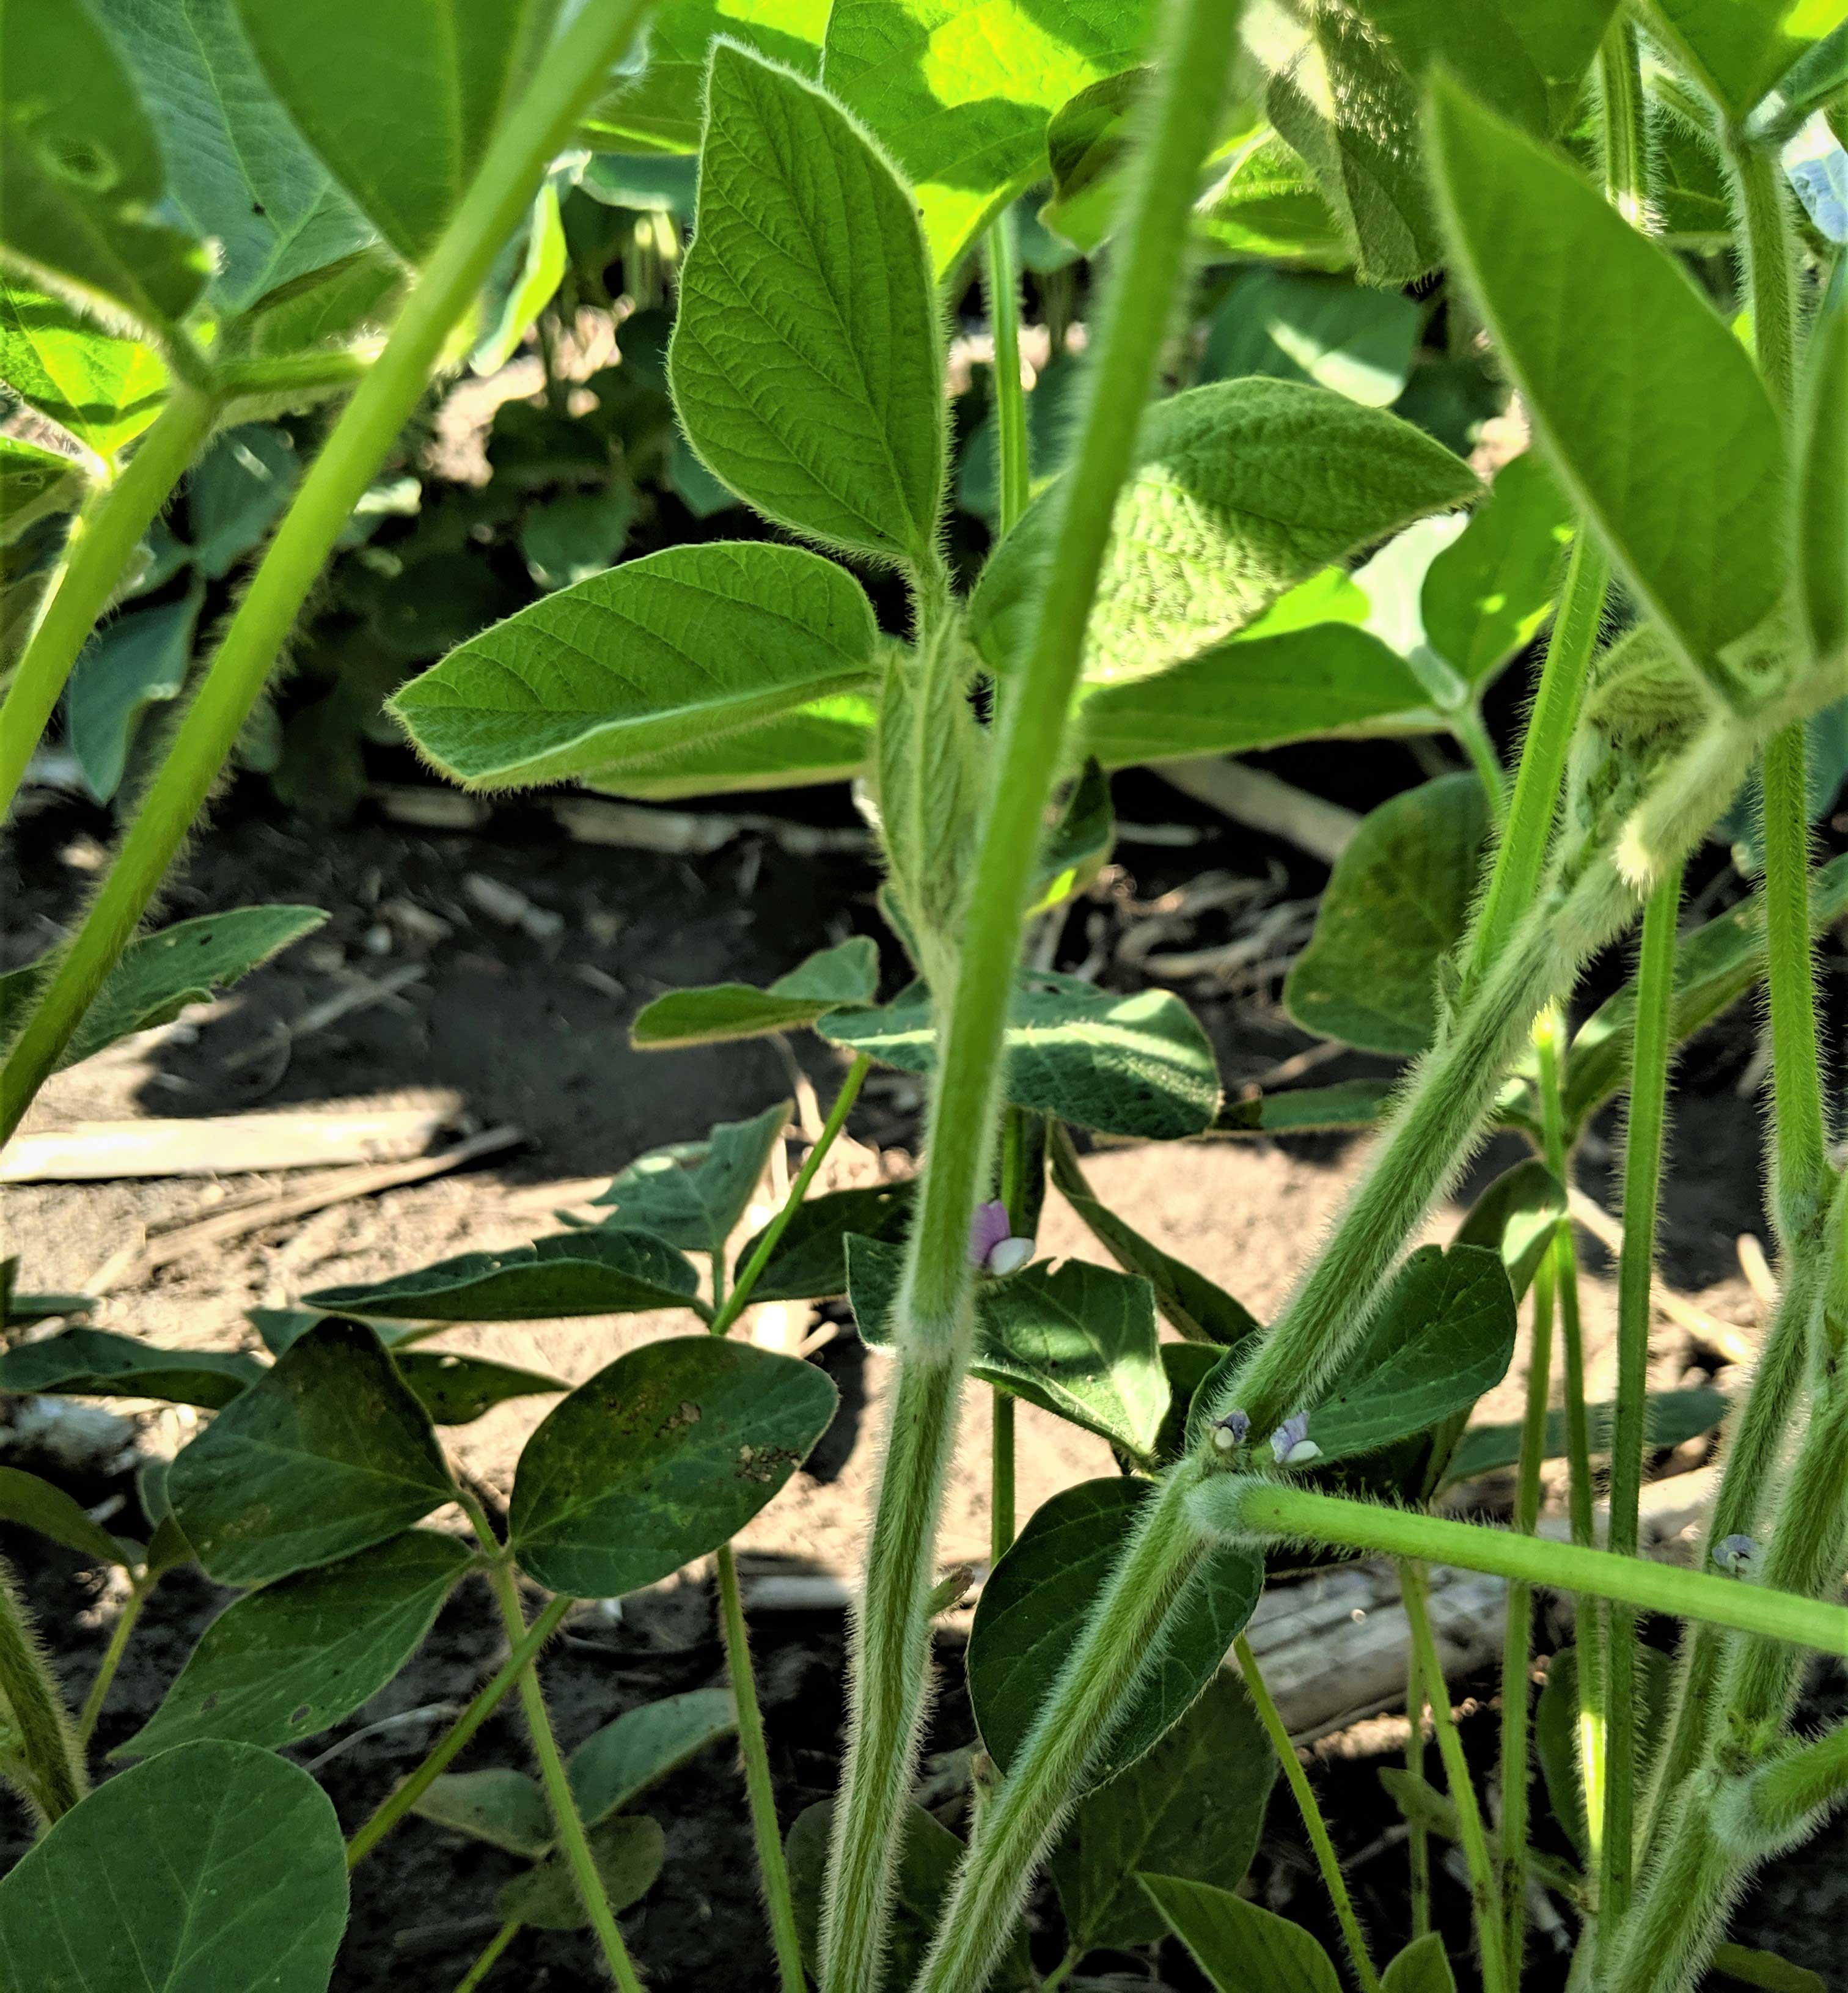 A green soybean plant with purple and white flowers begining to develop.